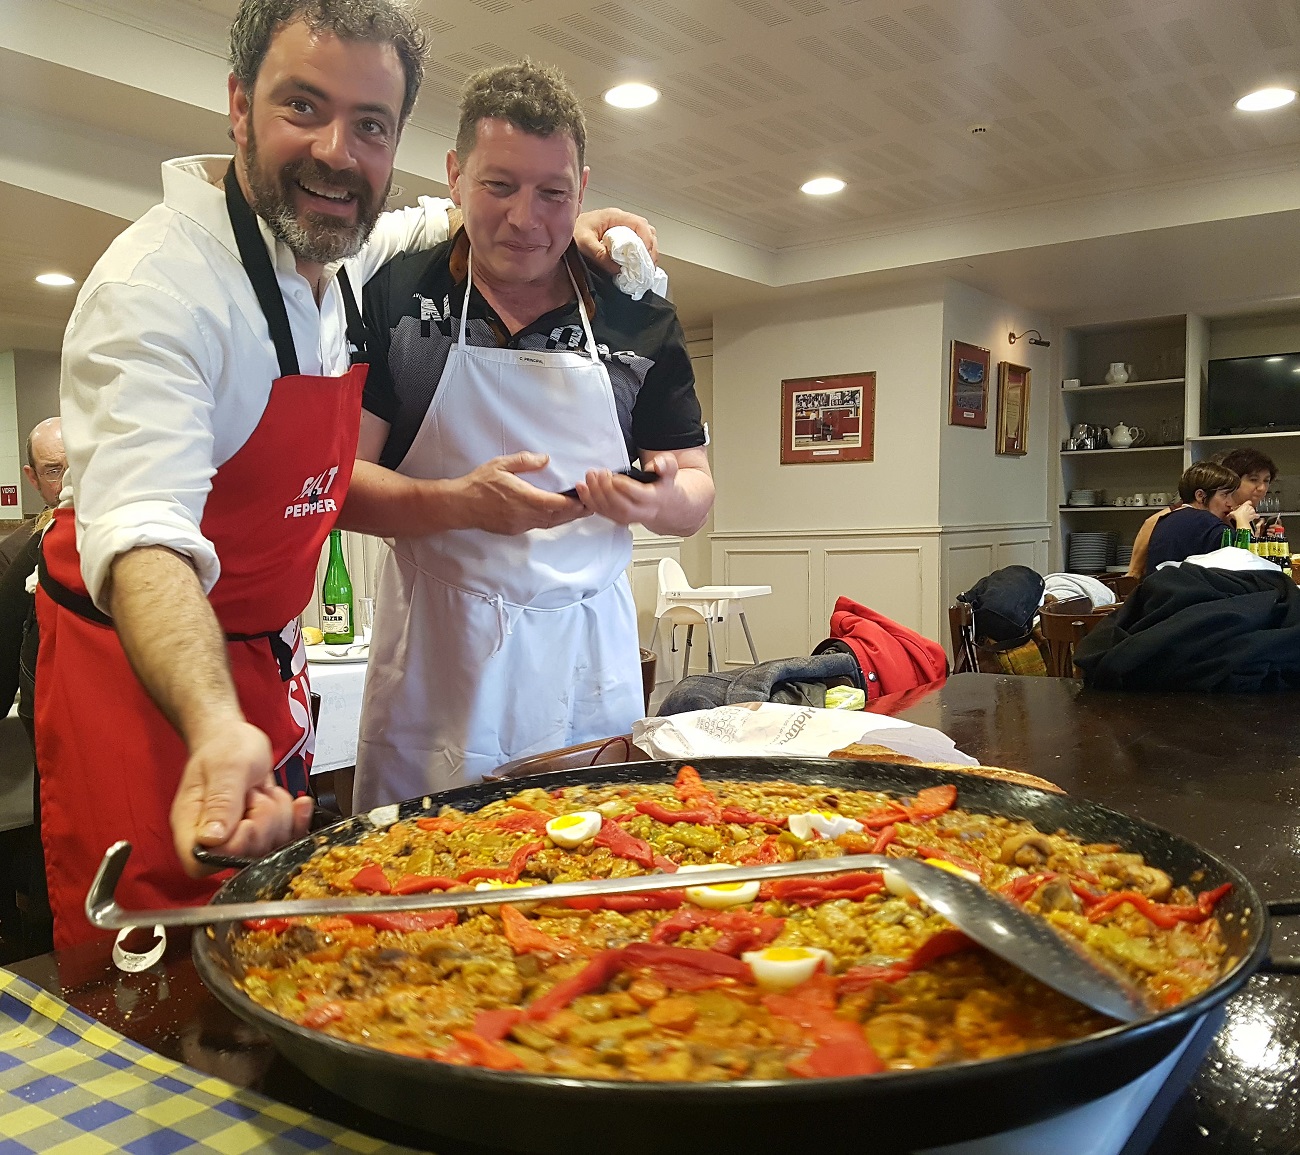 A Gastronomic Club Experience in Northern Spain